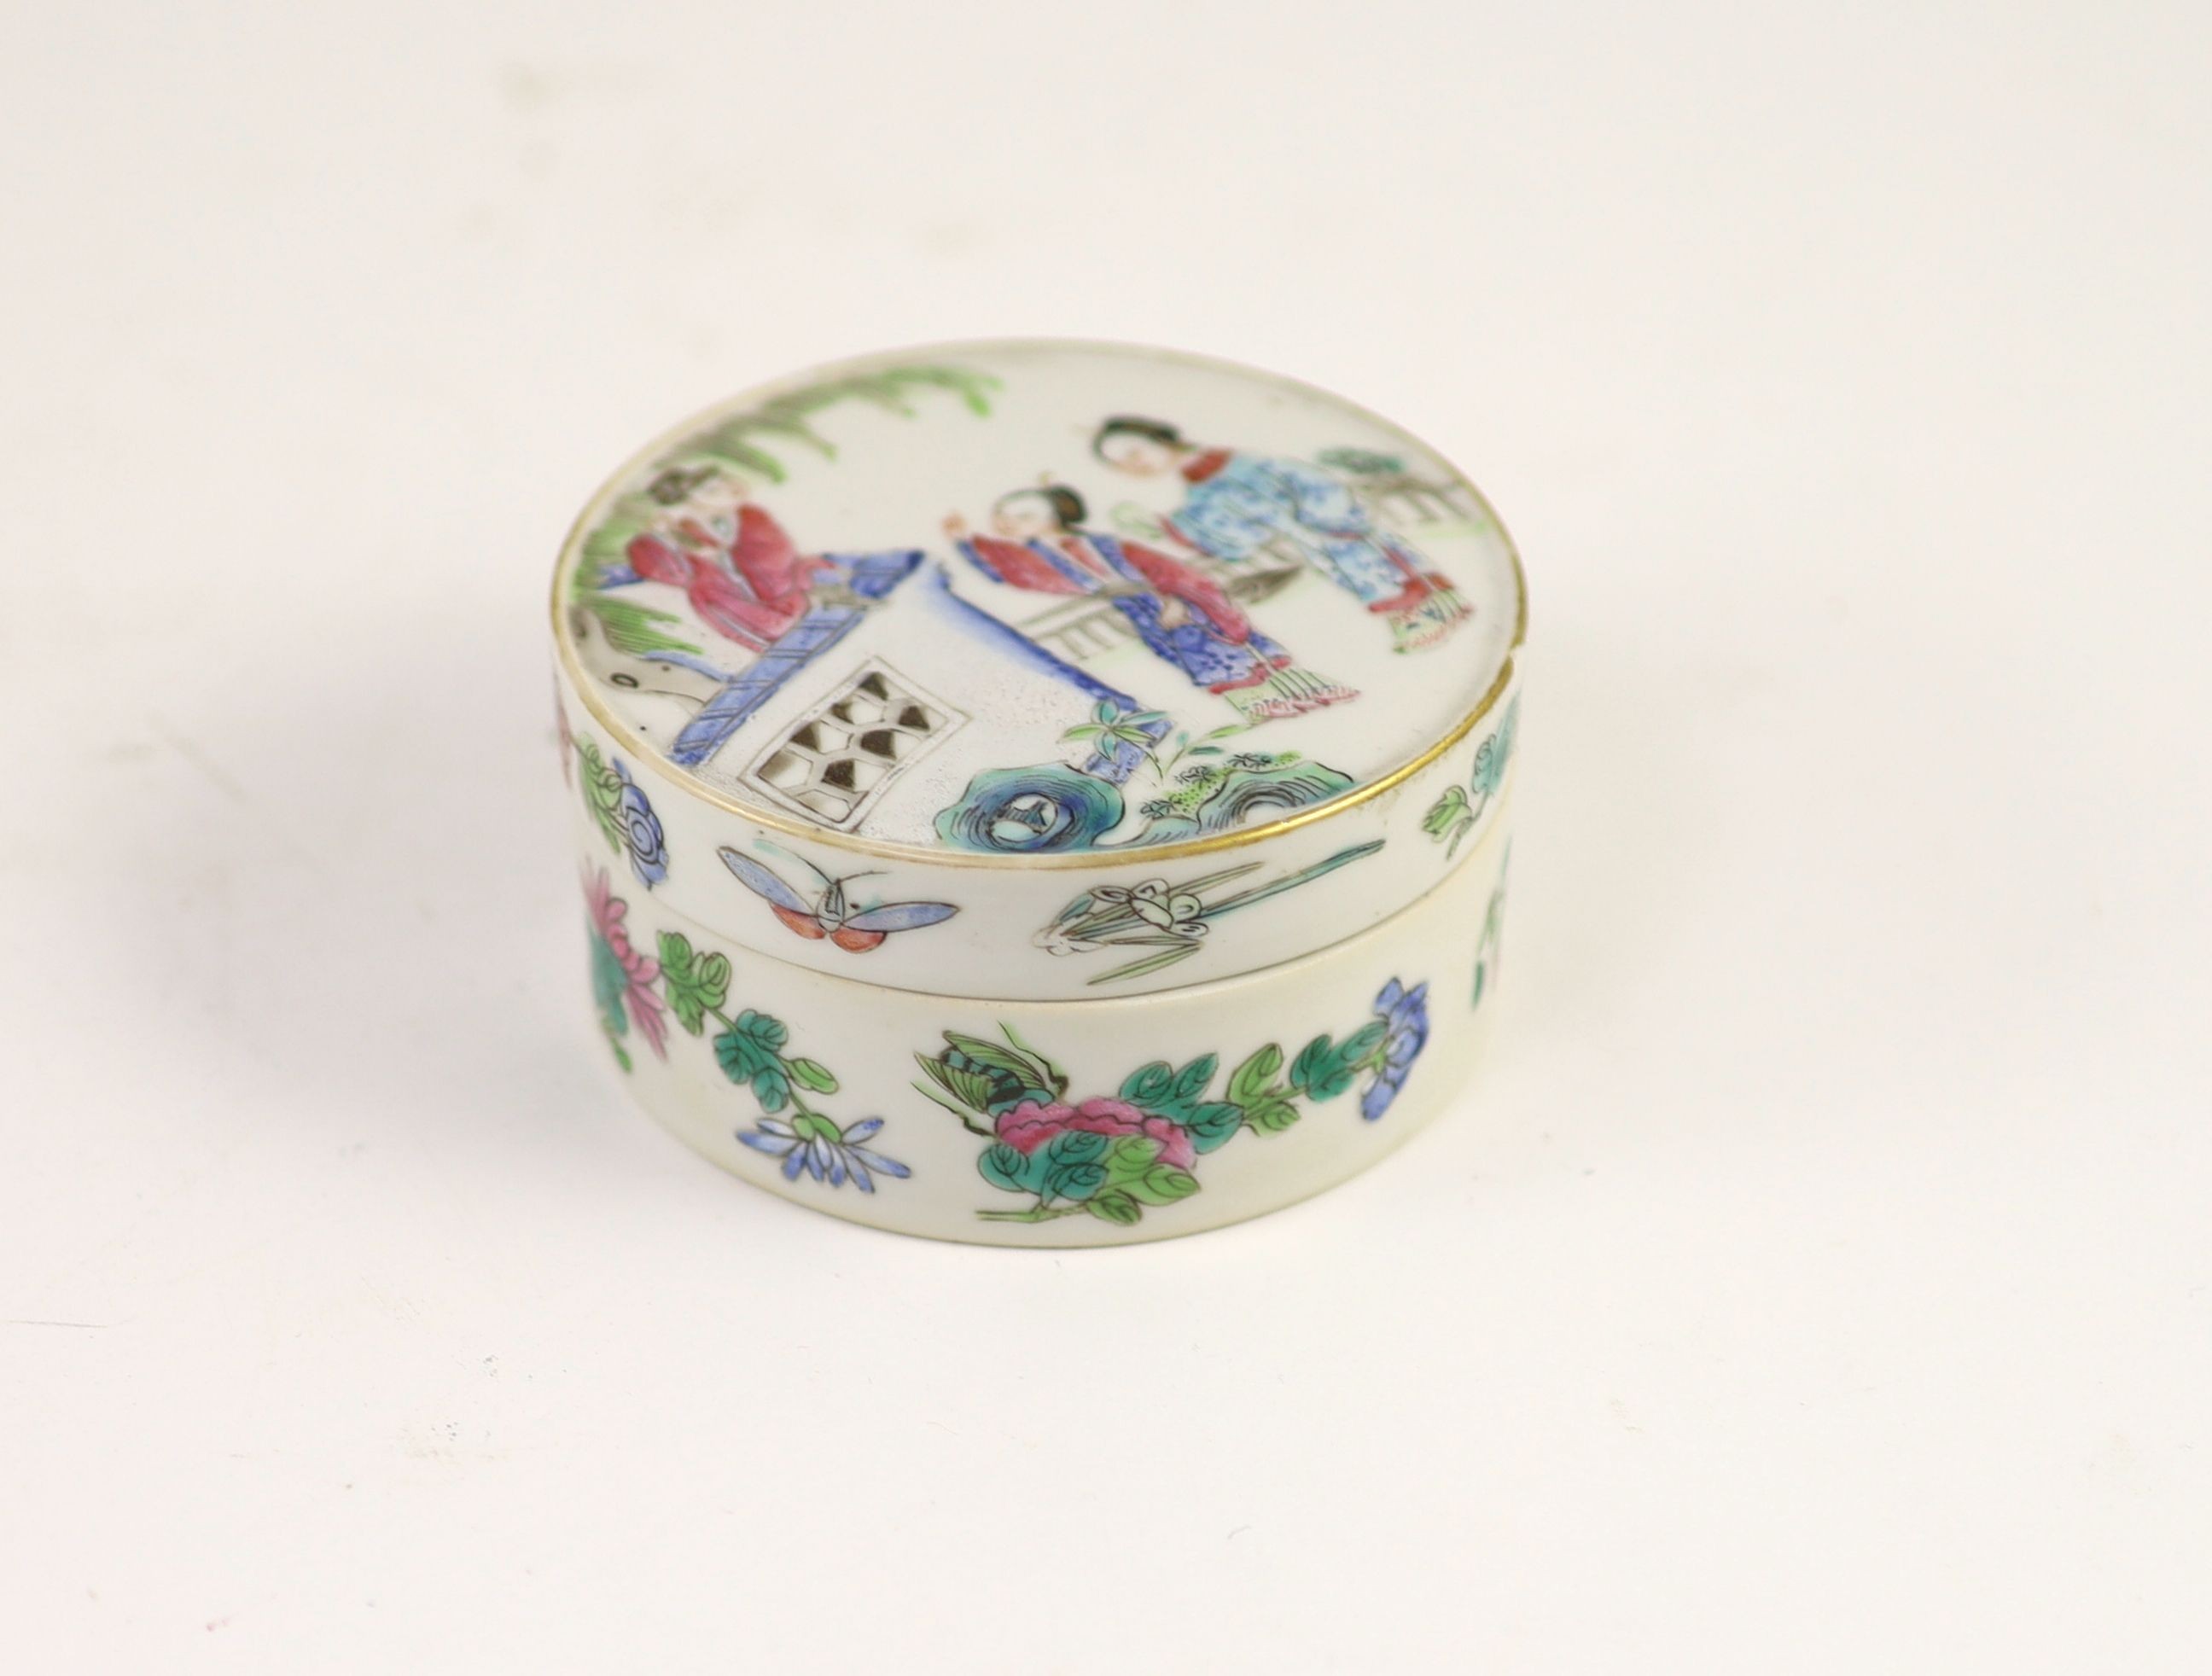 A Chinese famille rose drum-shaped box and cover, Jiaqing six character mark and period (1796-1820), 17.9 cm diameter